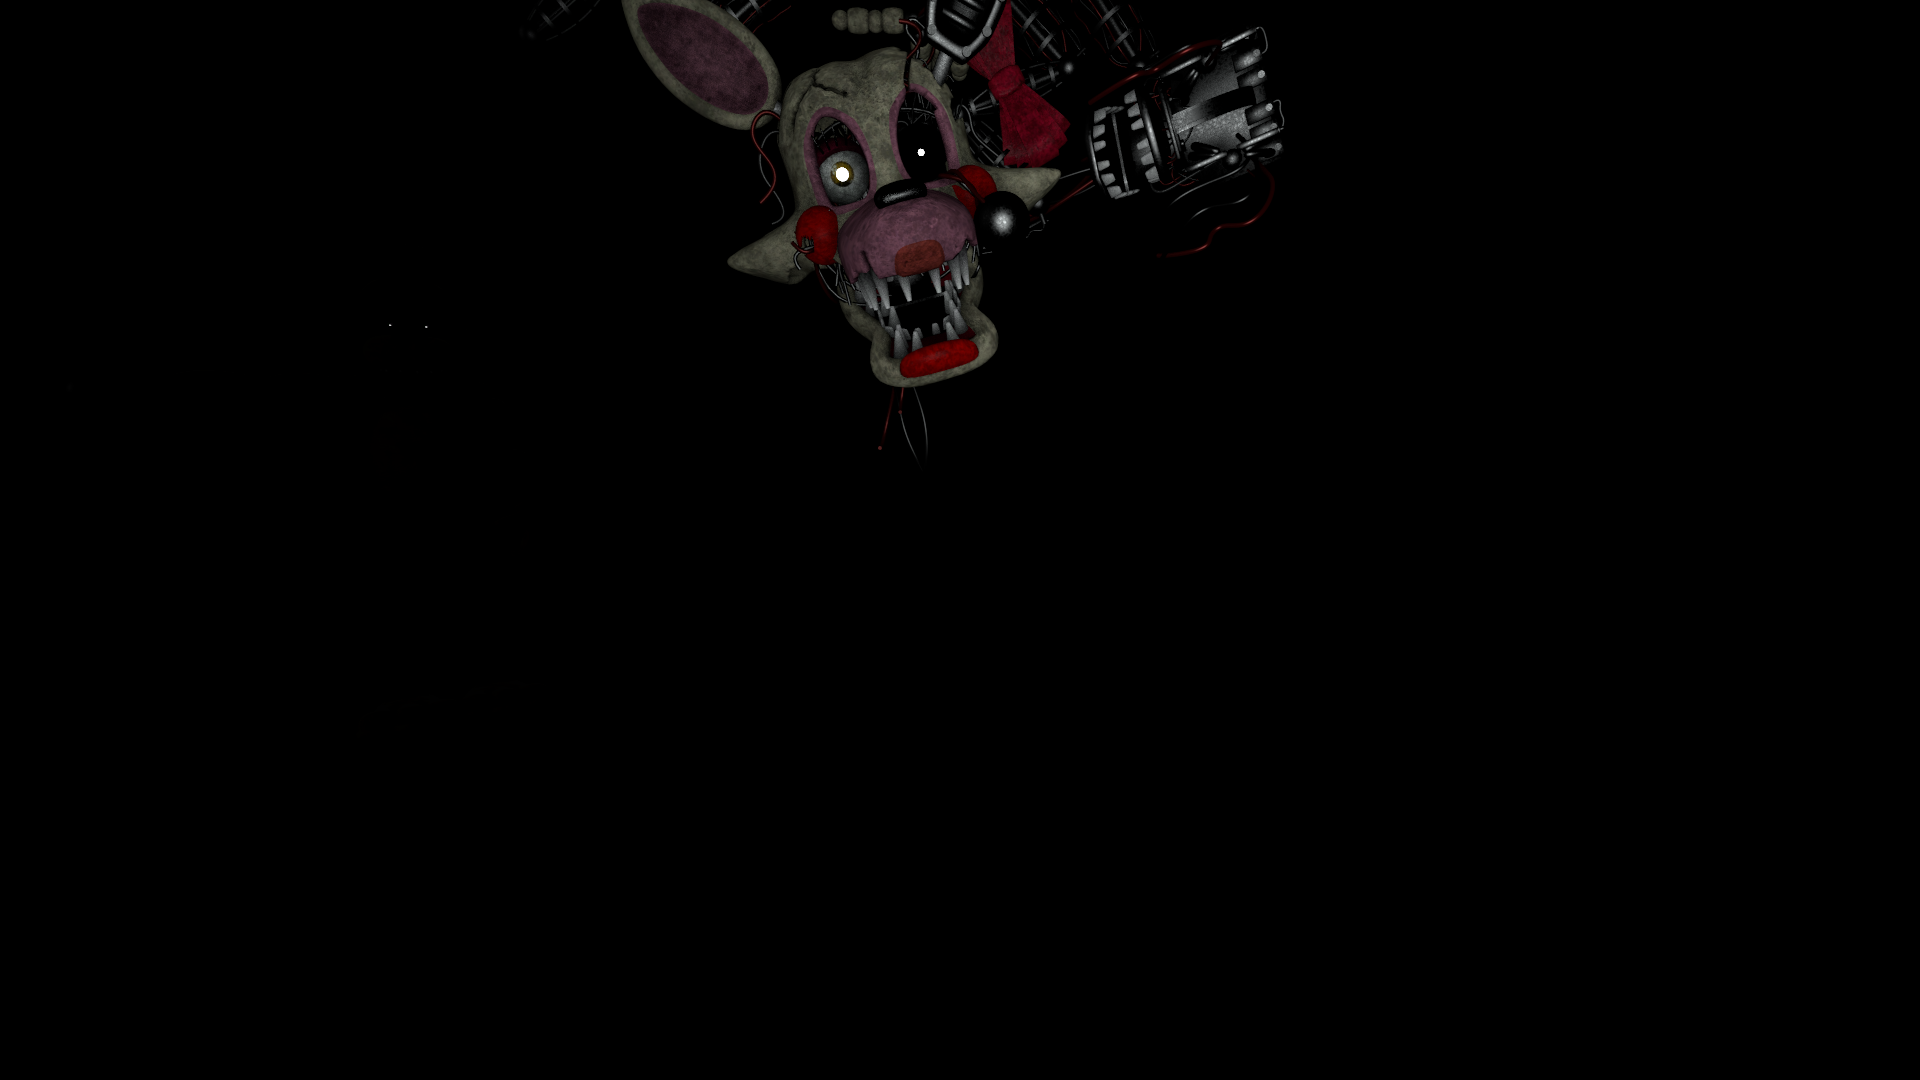 Video Game Five Nights At Freddy's 2 HD Wallpaper | Background Image